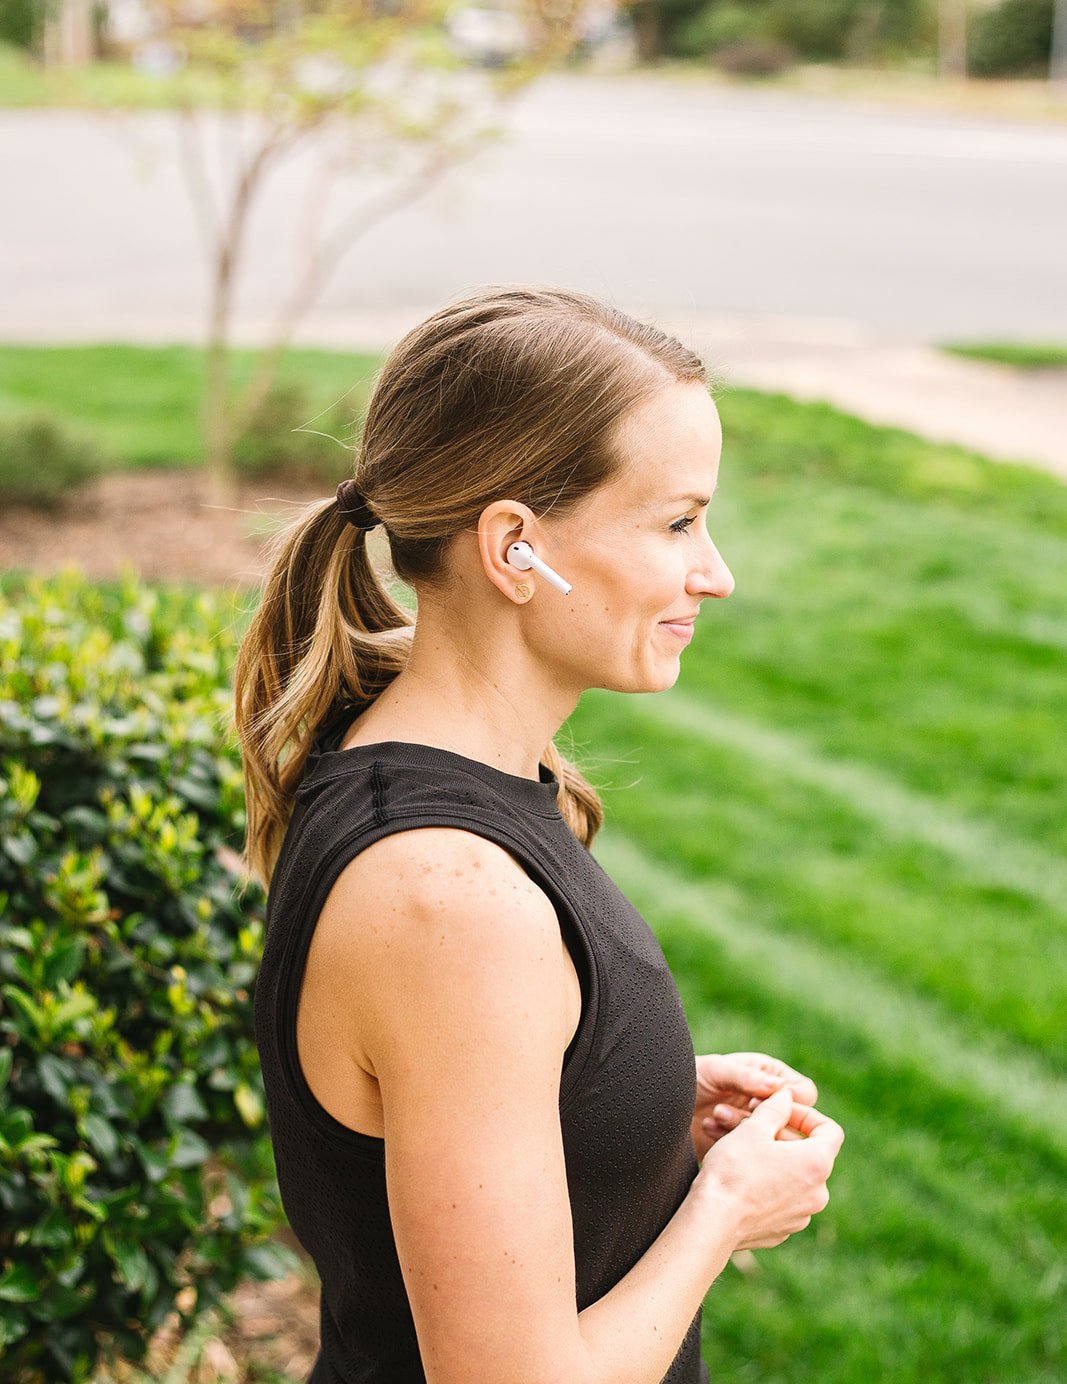 Airpods Running A marathoner shares if it works for running